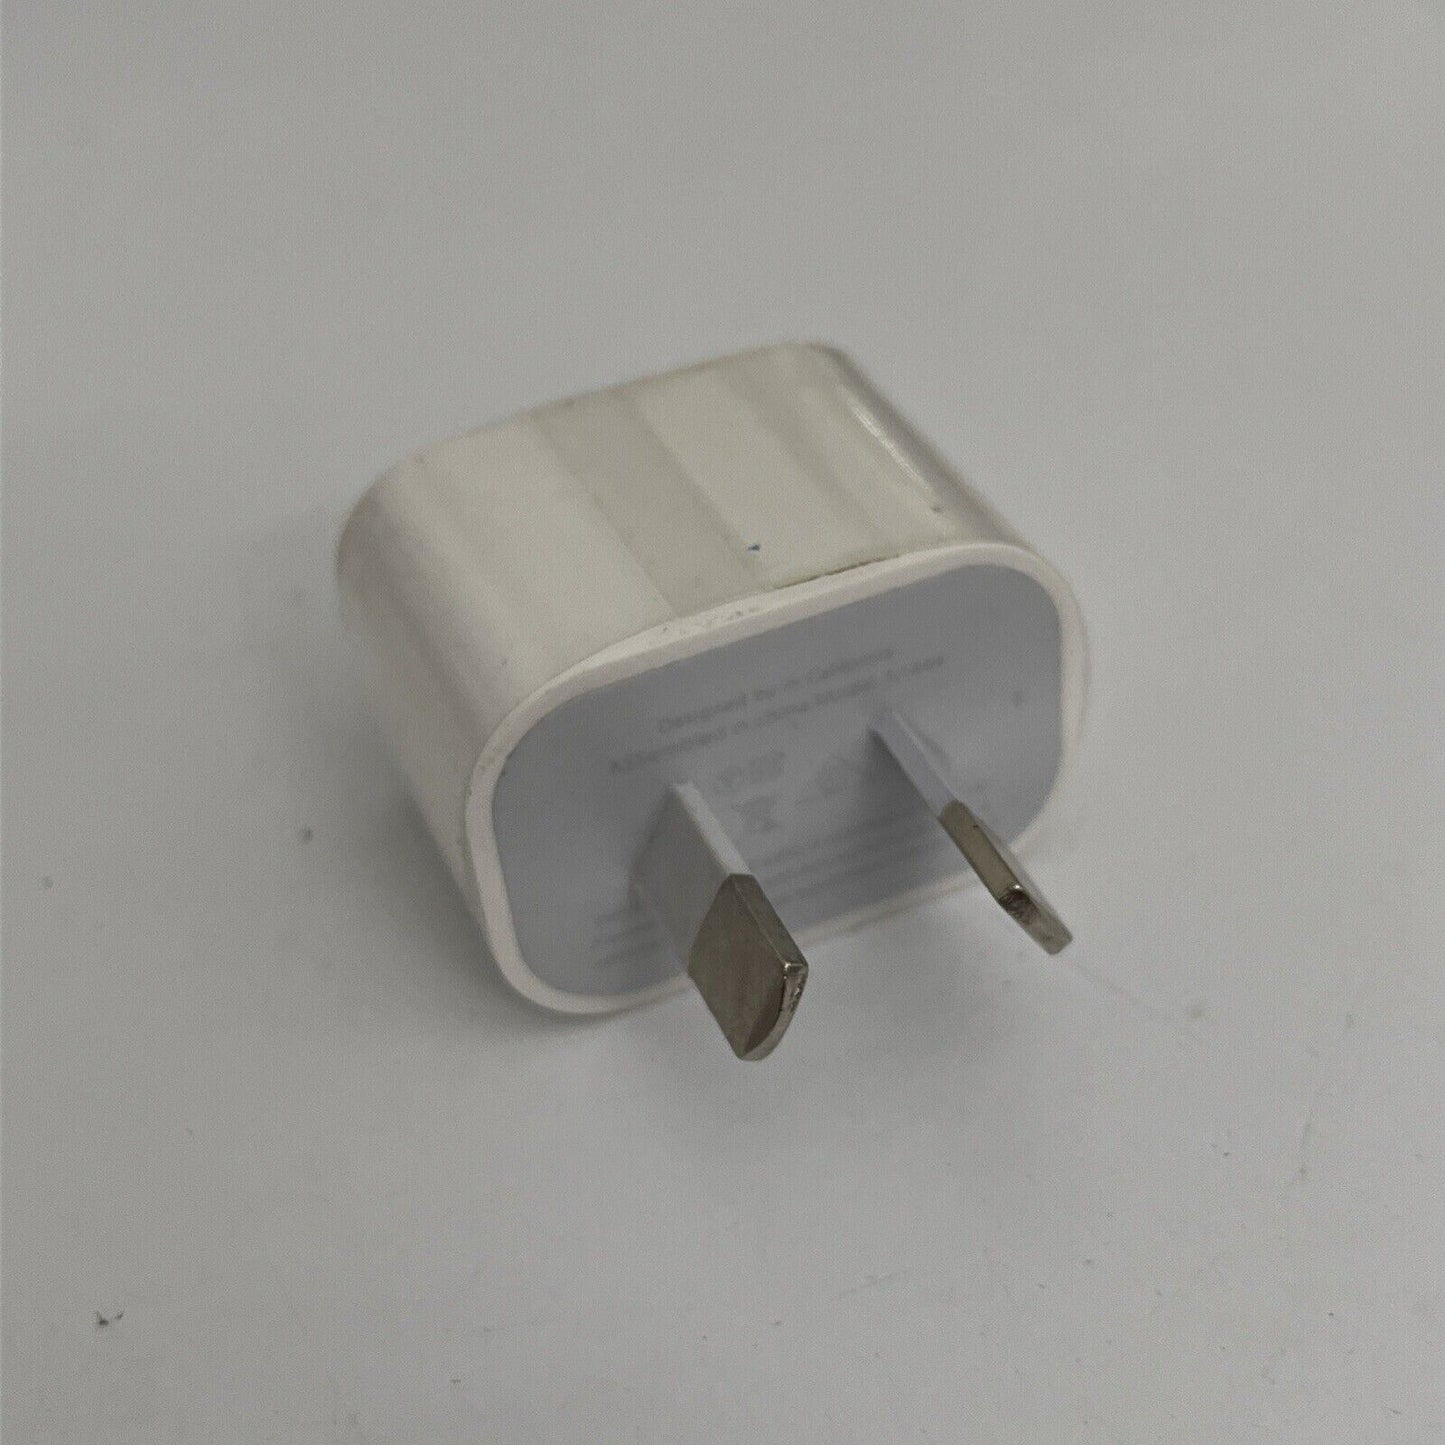 Genuine Apple A1444 USB Charger for Apple iPhone iPod iPad